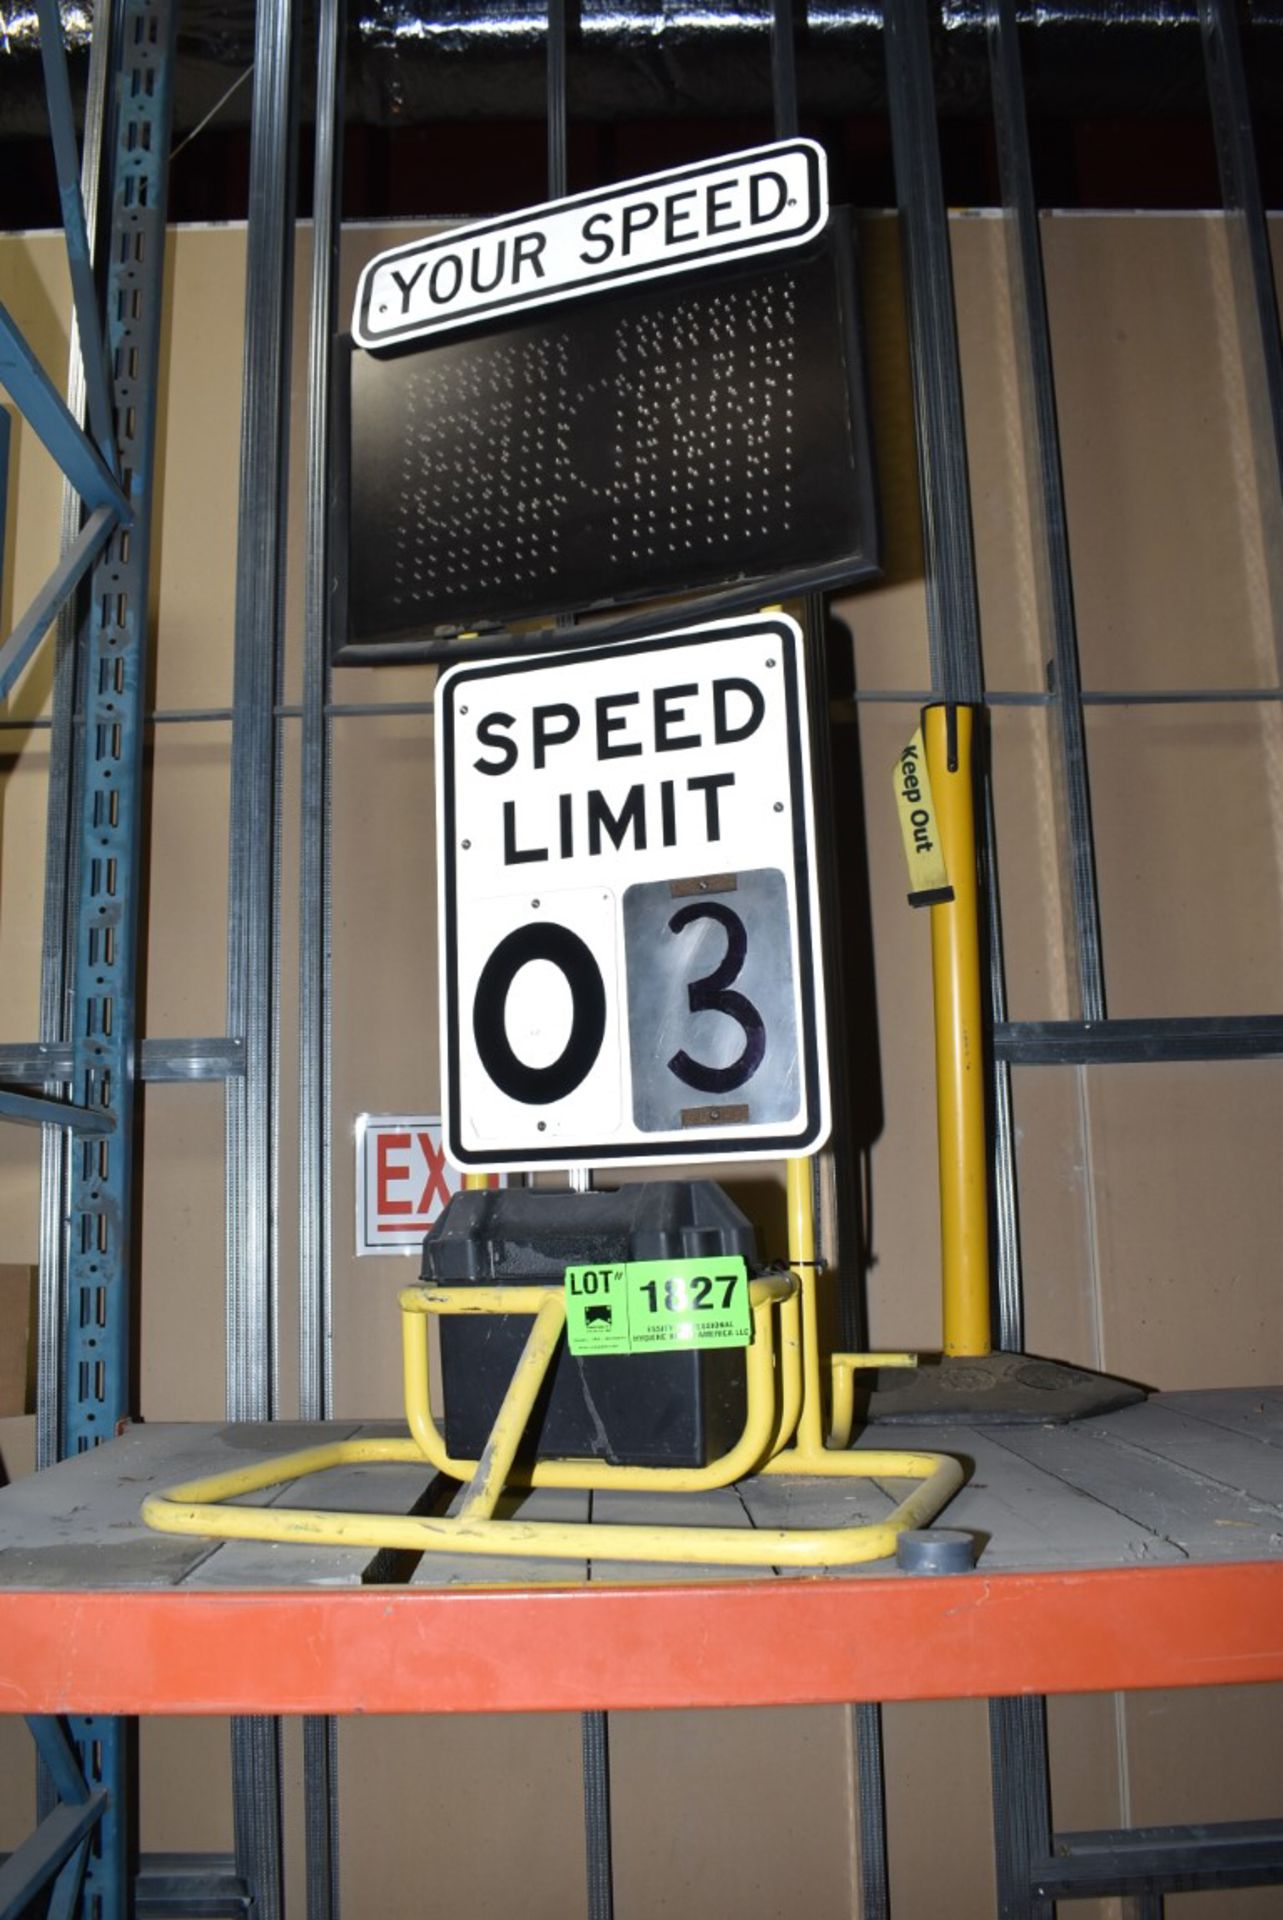 SPEED LIMIT MONITOR [RIGGING FEE FOR LOT #1827 - $25 USD PLUS APPLICABLE TAXES]